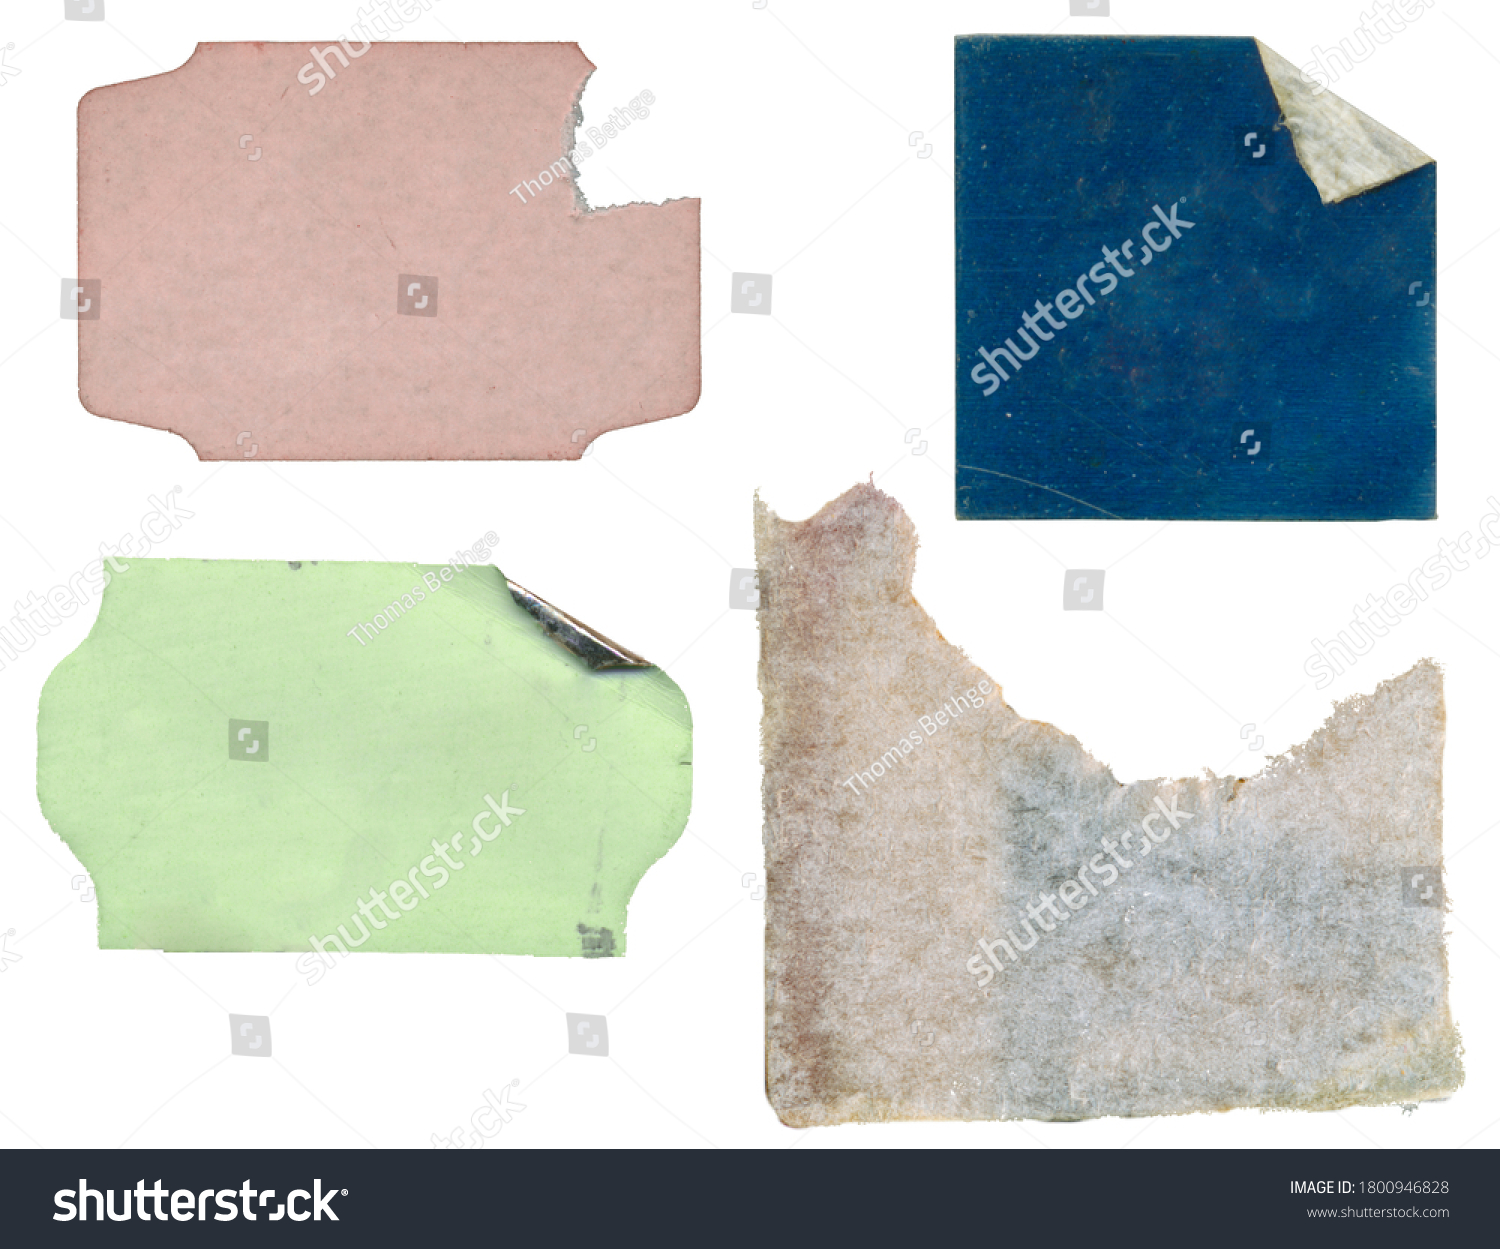 set of empty grungy adhesive price stickers, multicolored price tags, with free copy space, isolated on white background #1800946828